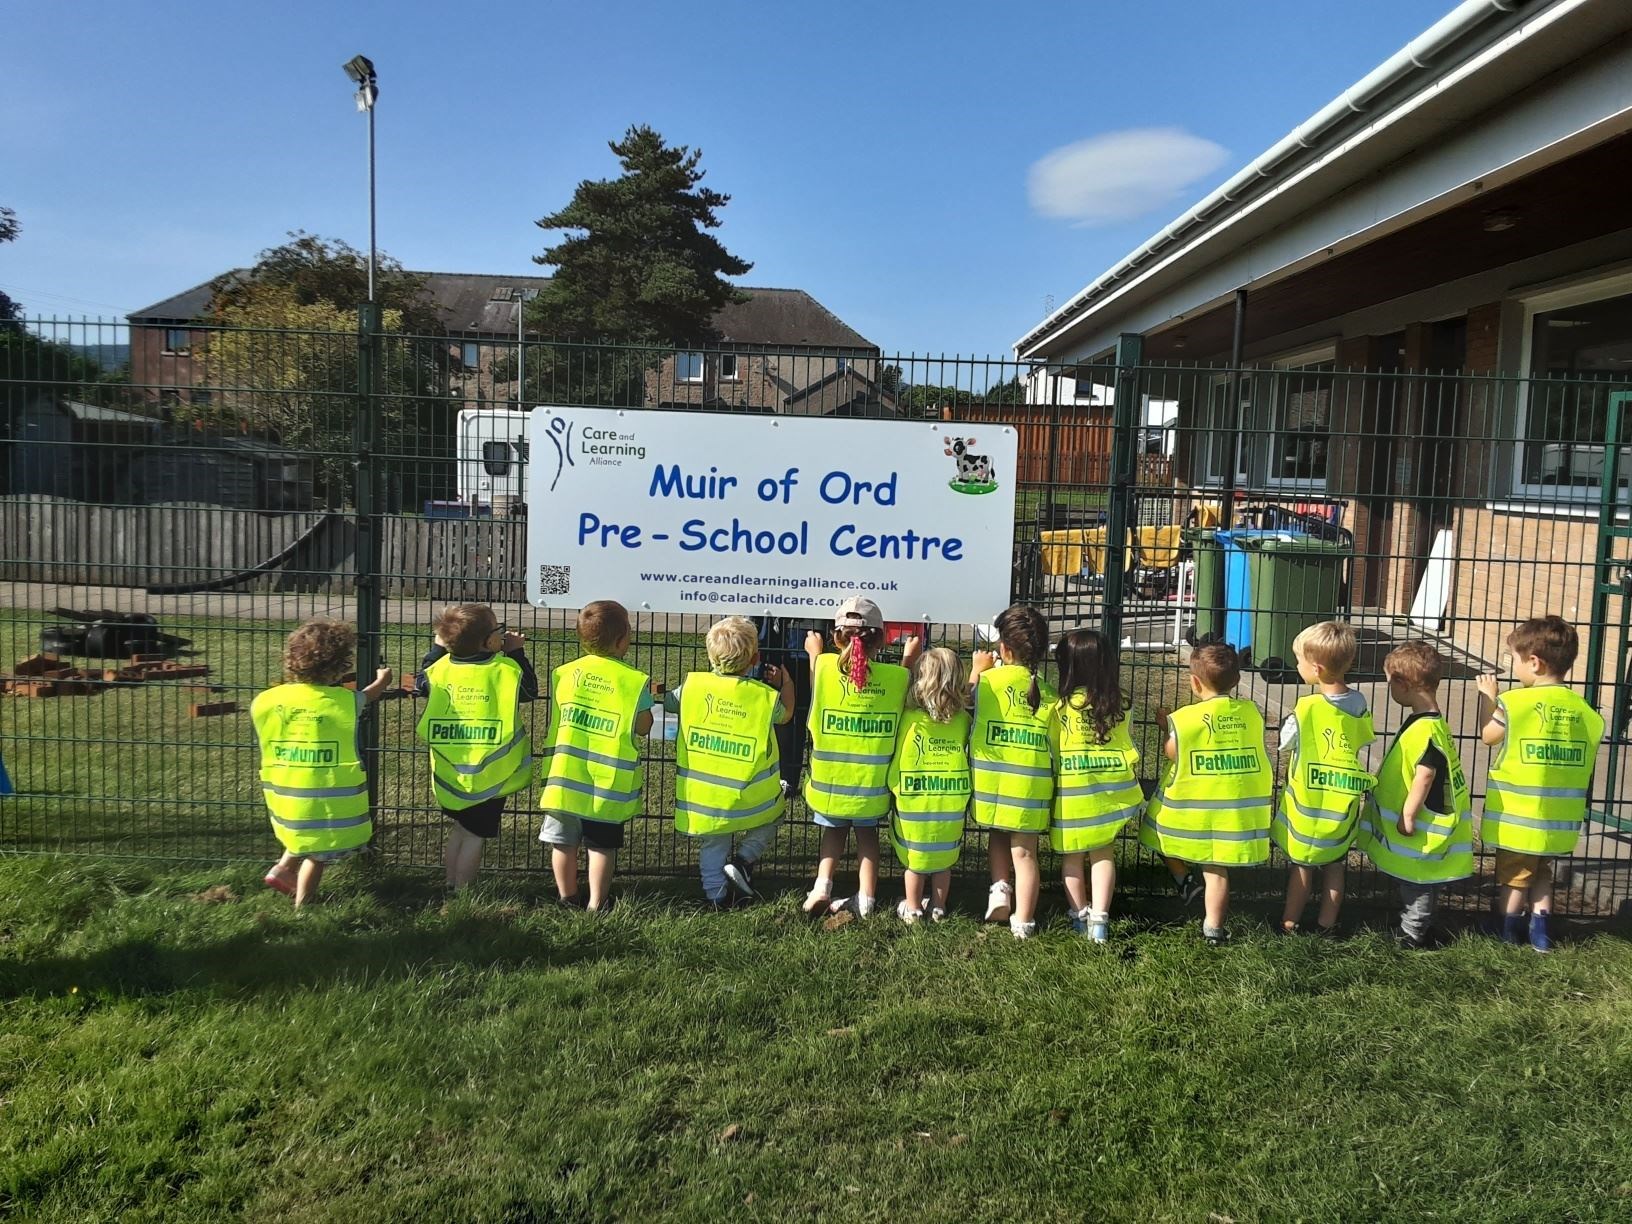 The Muir of Ord youngsters won't go unnoticed in their new high-visibility vests.